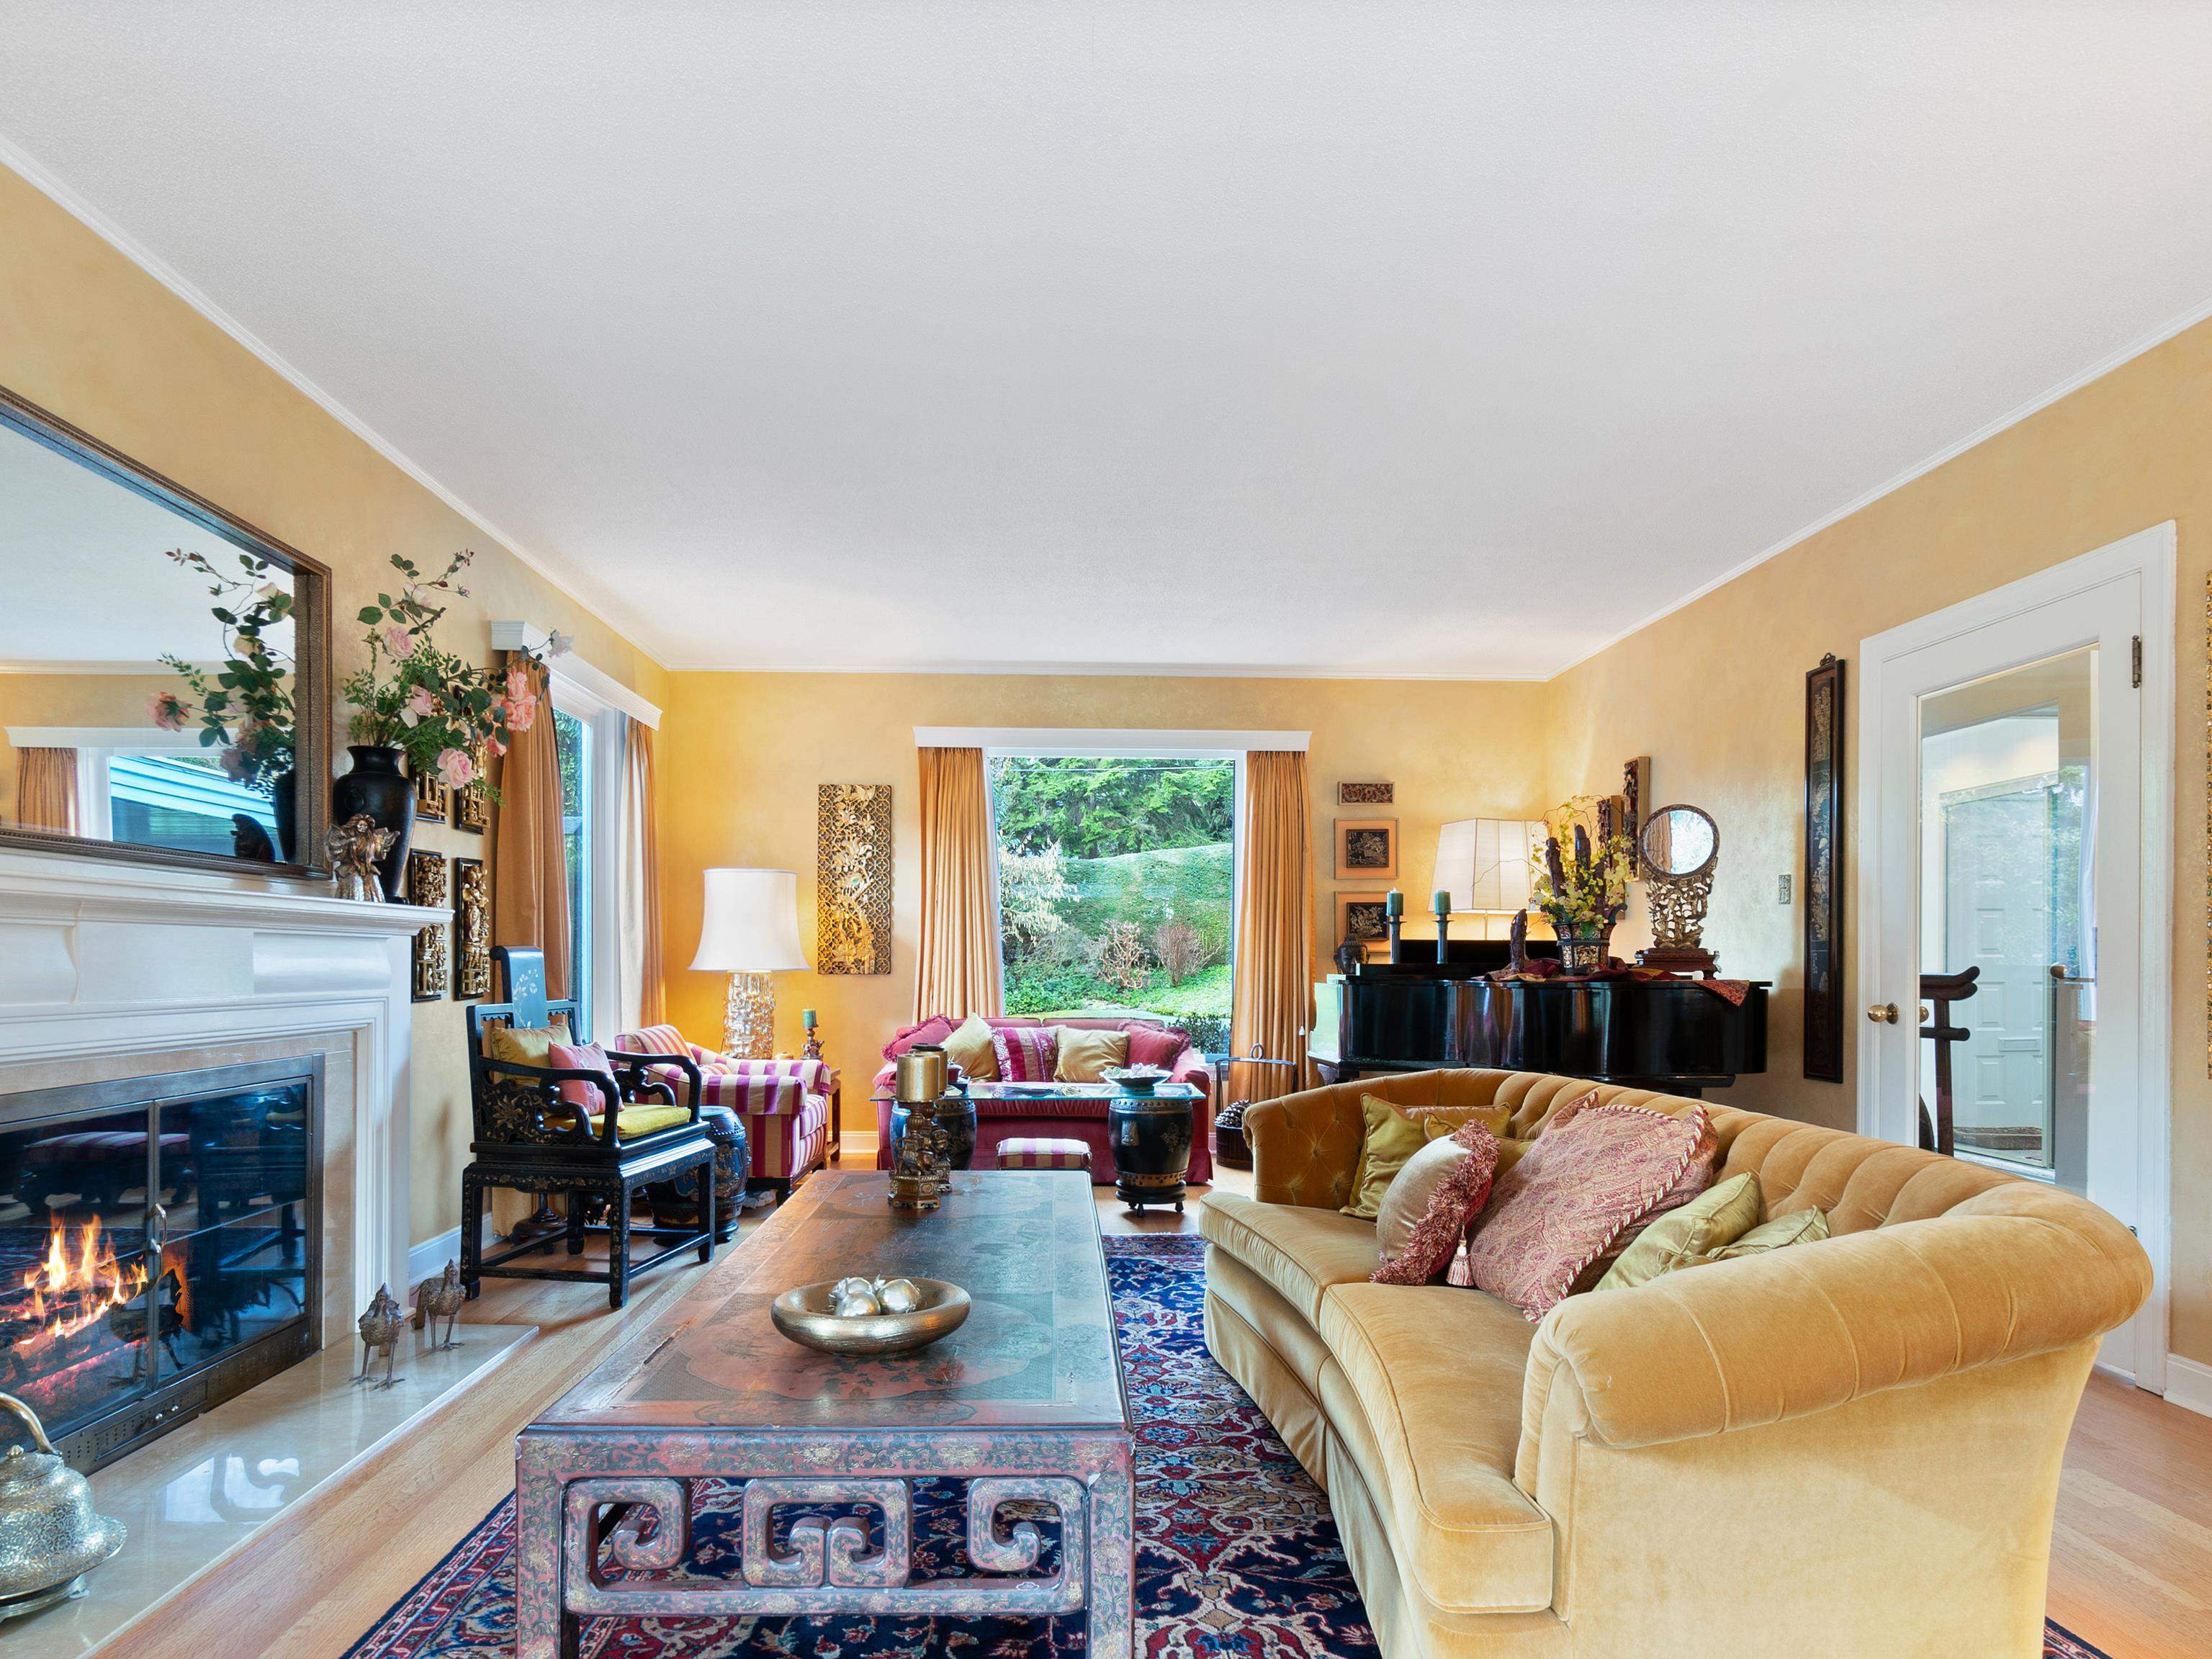 Listing image of 550 SOUTHBOROUGH DRIVE